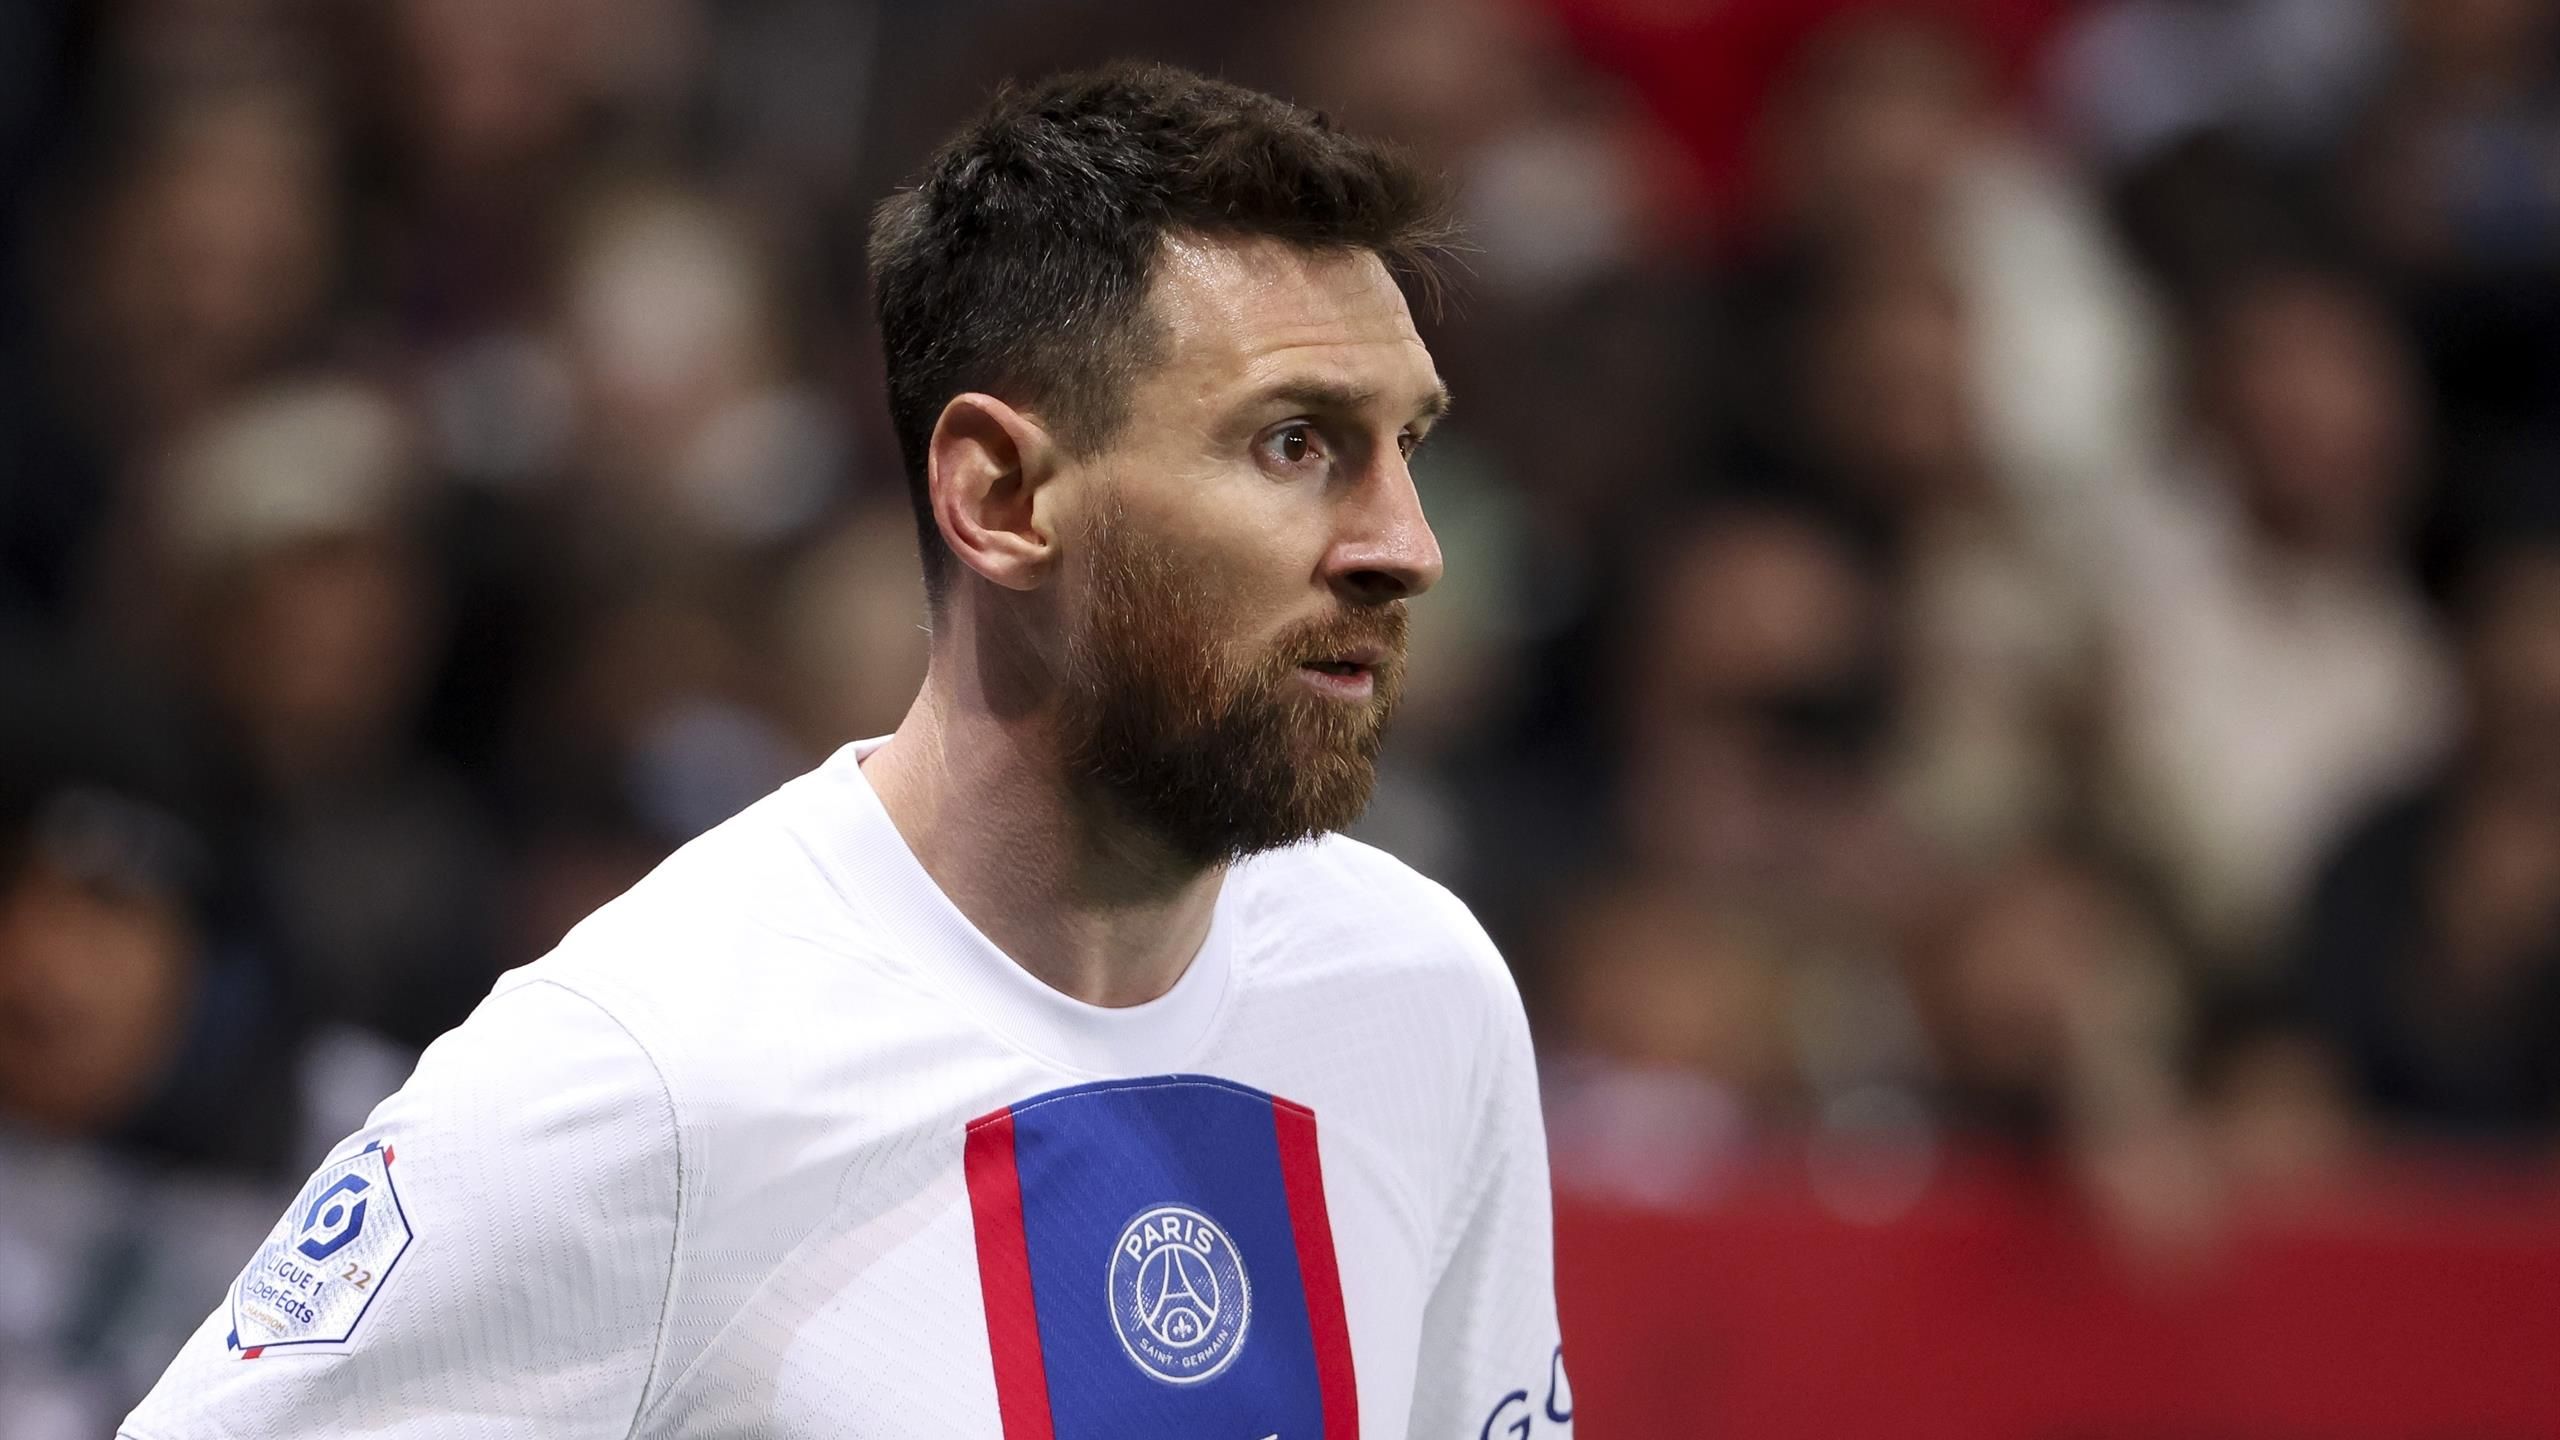 Messi 'likely' to leave PSG at end of season